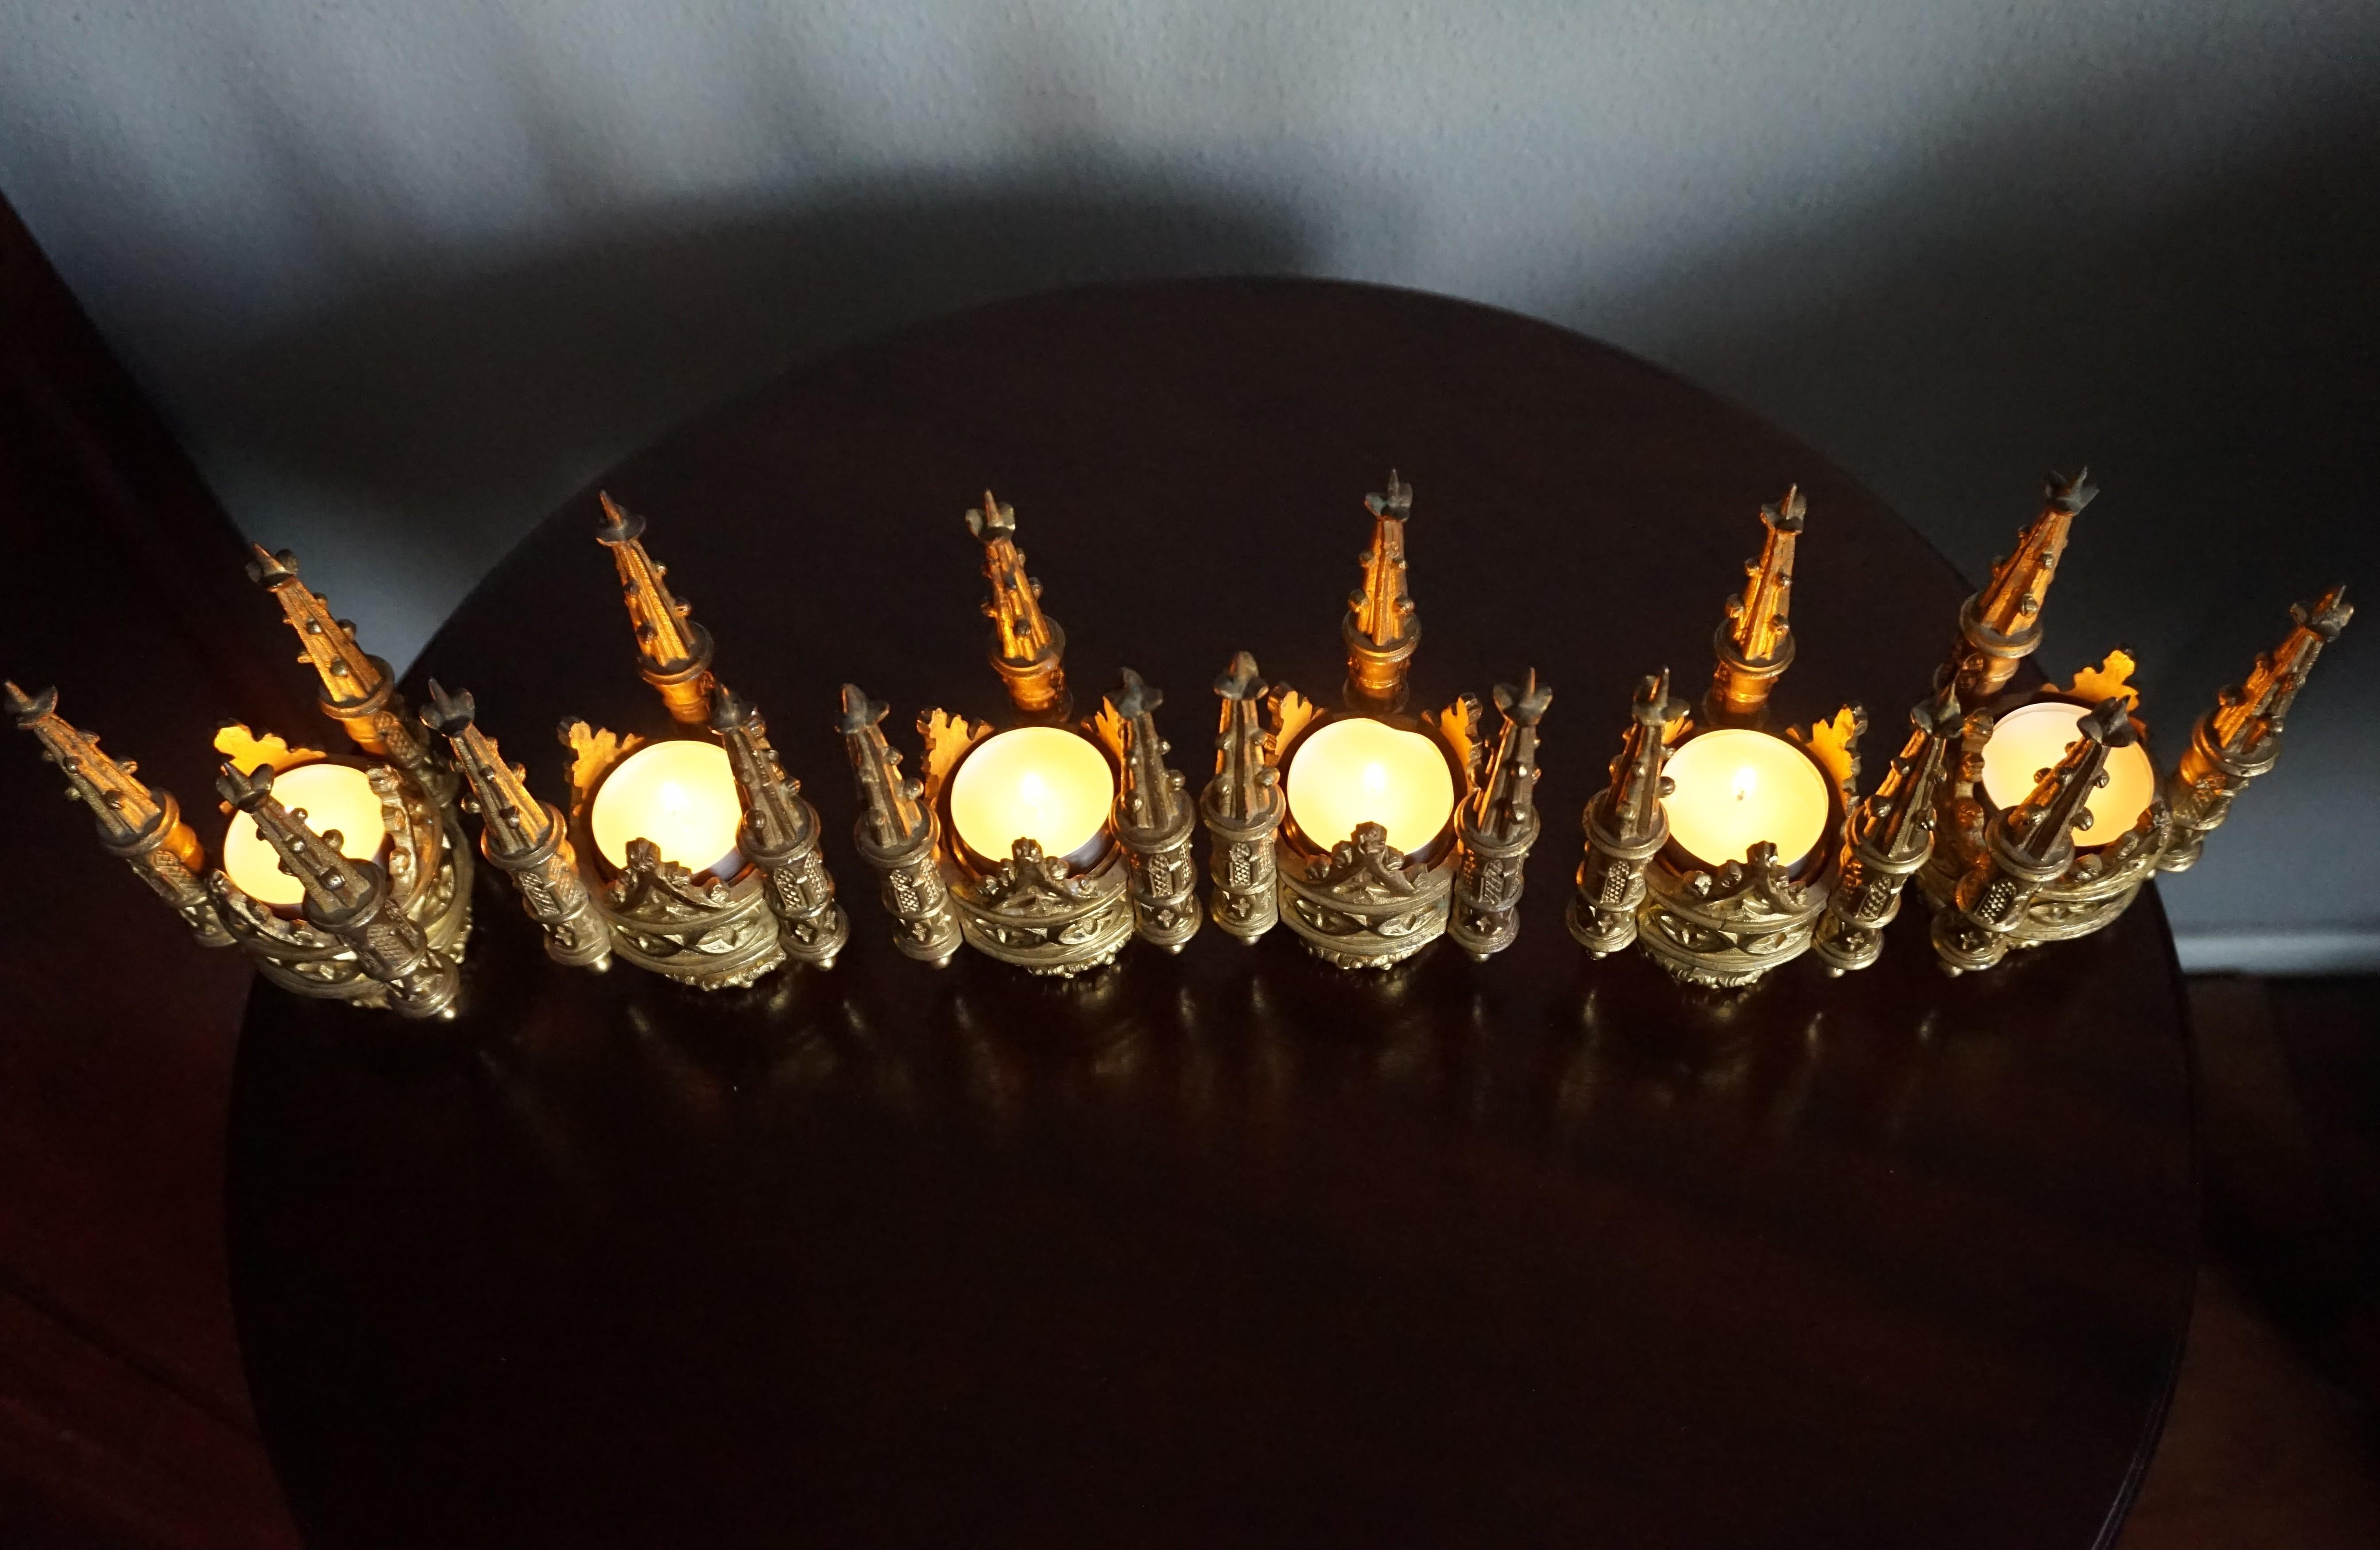 Top quality made and highly decorative Gothic candlesticks.

Especially with the holiday season coming up, you could not wish for a more beautiful and decorative set of antique candle holders. These six, 19th century solid bronze candle holders were